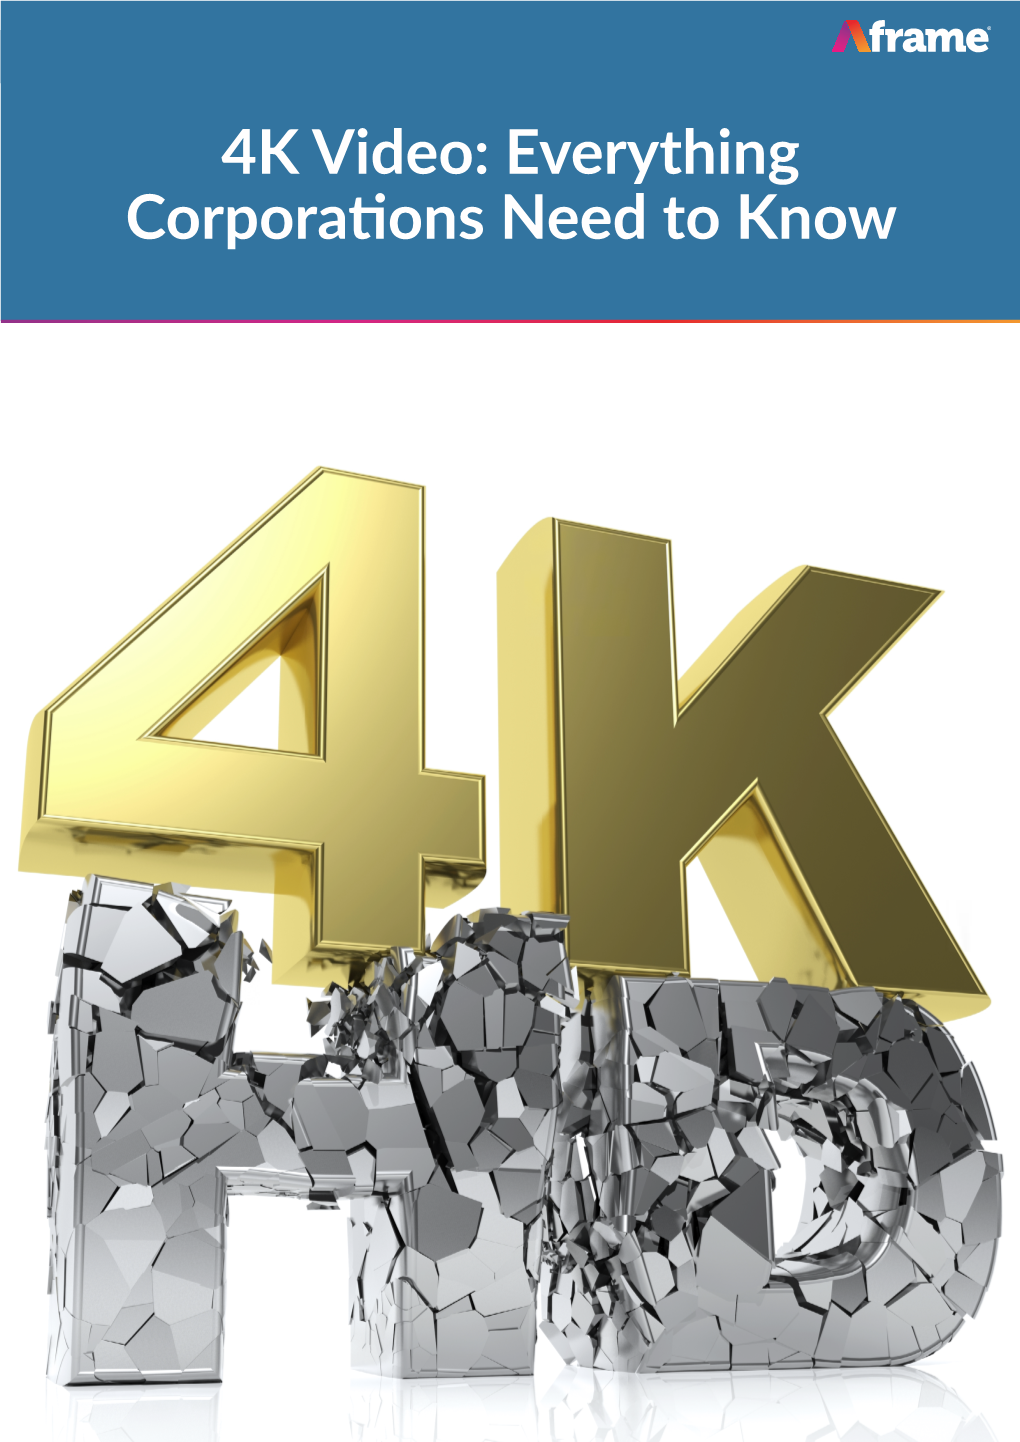 4K Video: Everything Corporates Need to Know 4K Video: Everything Corporations Need to Know